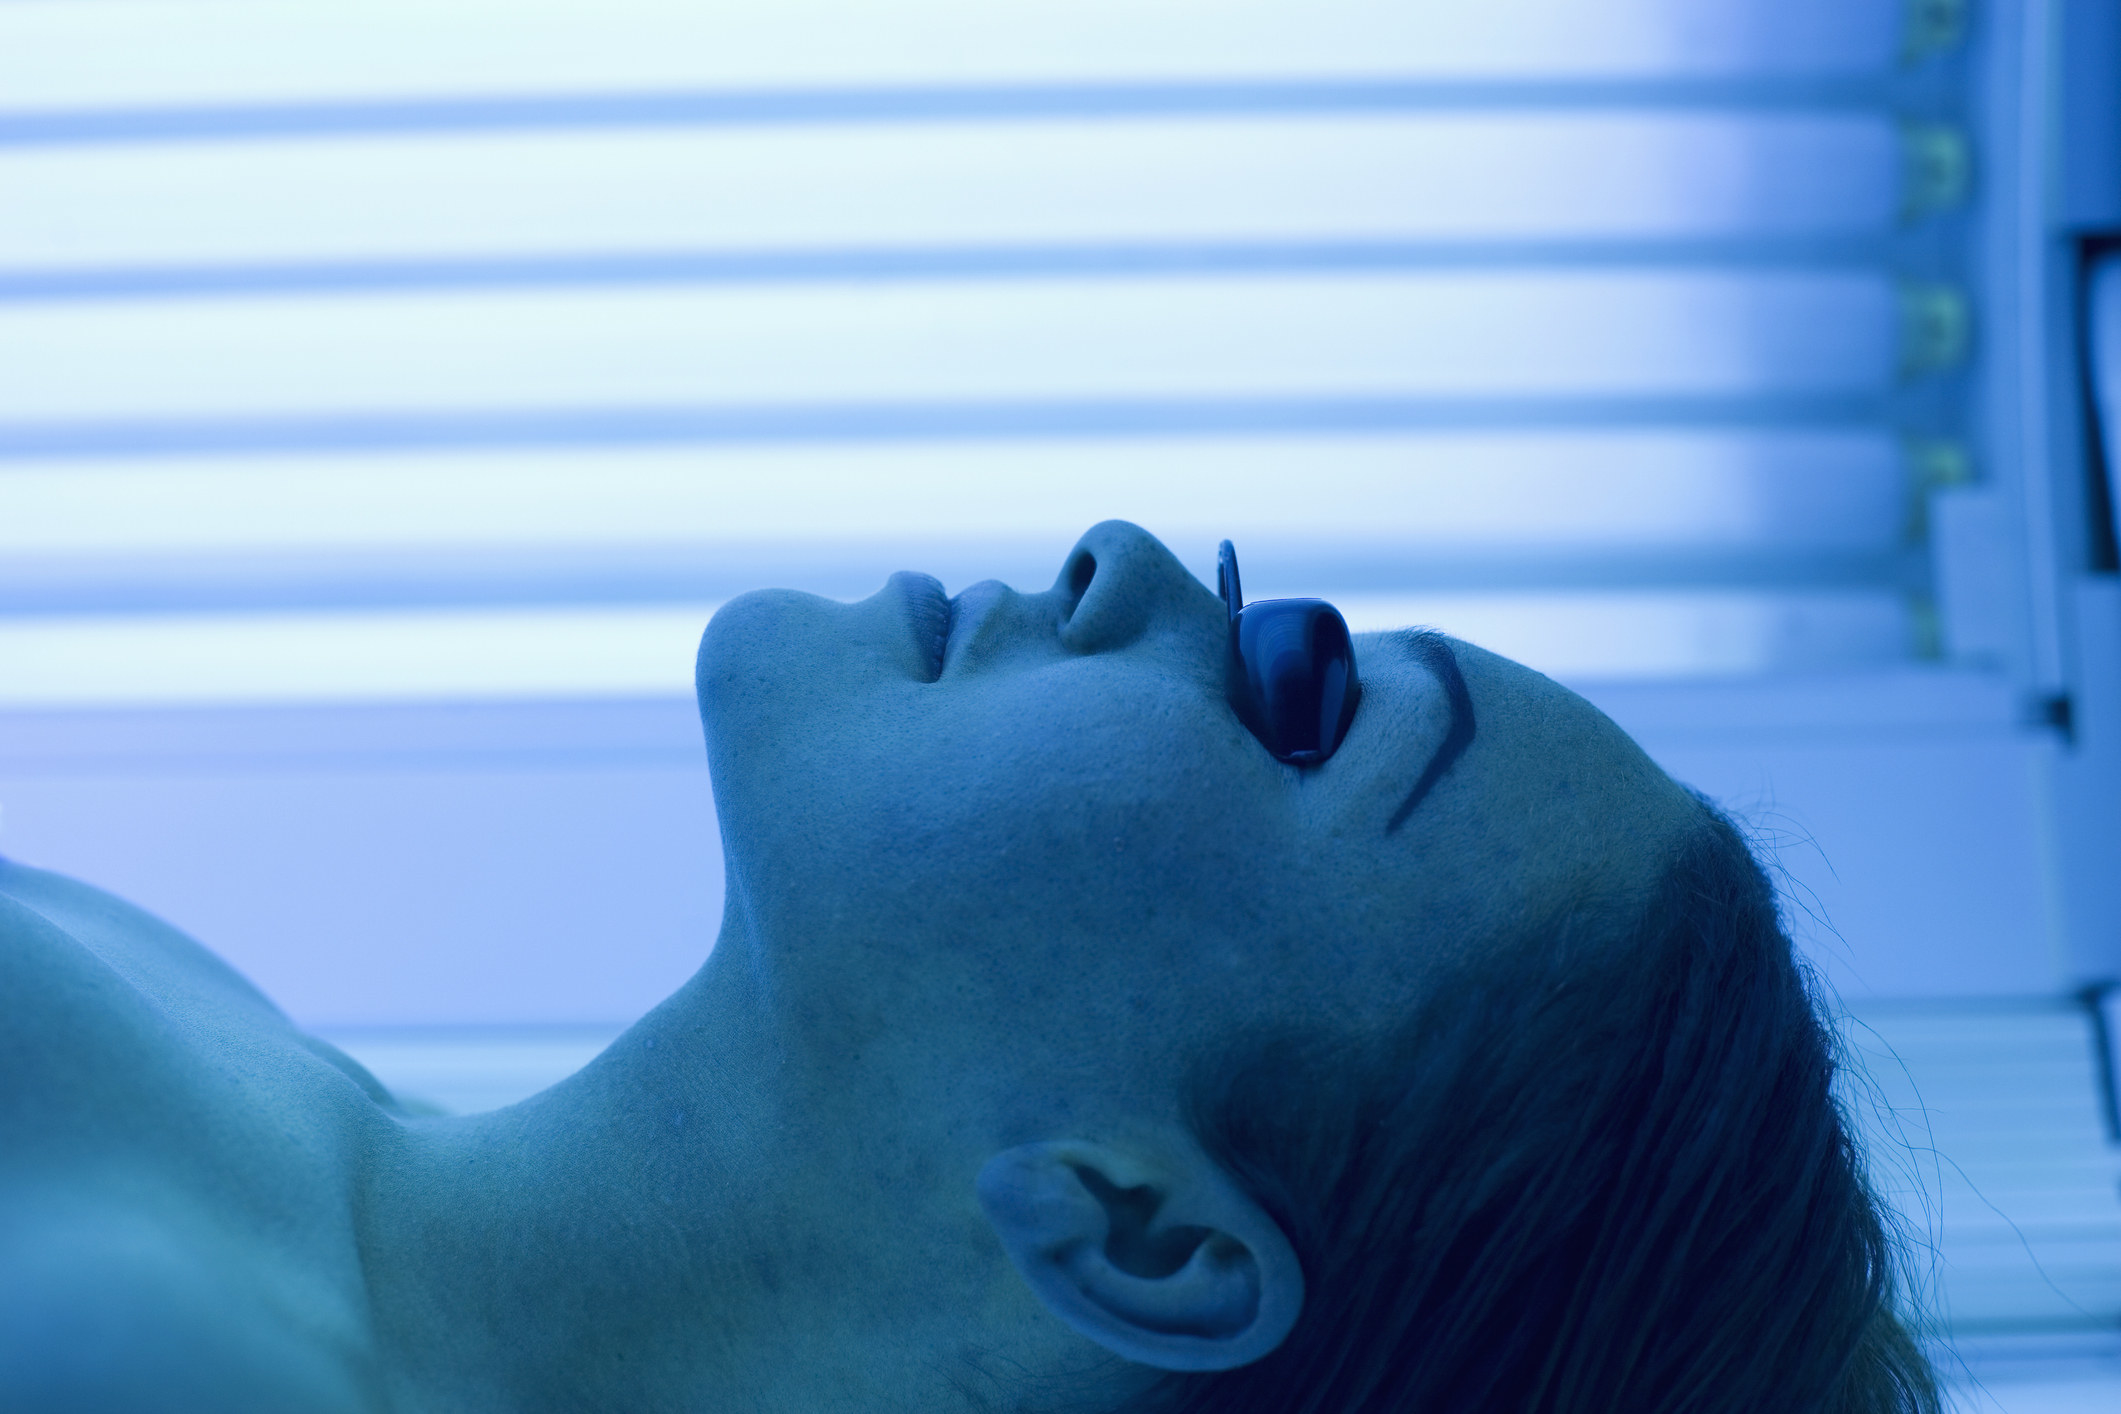 Woman lying in a tanning booth